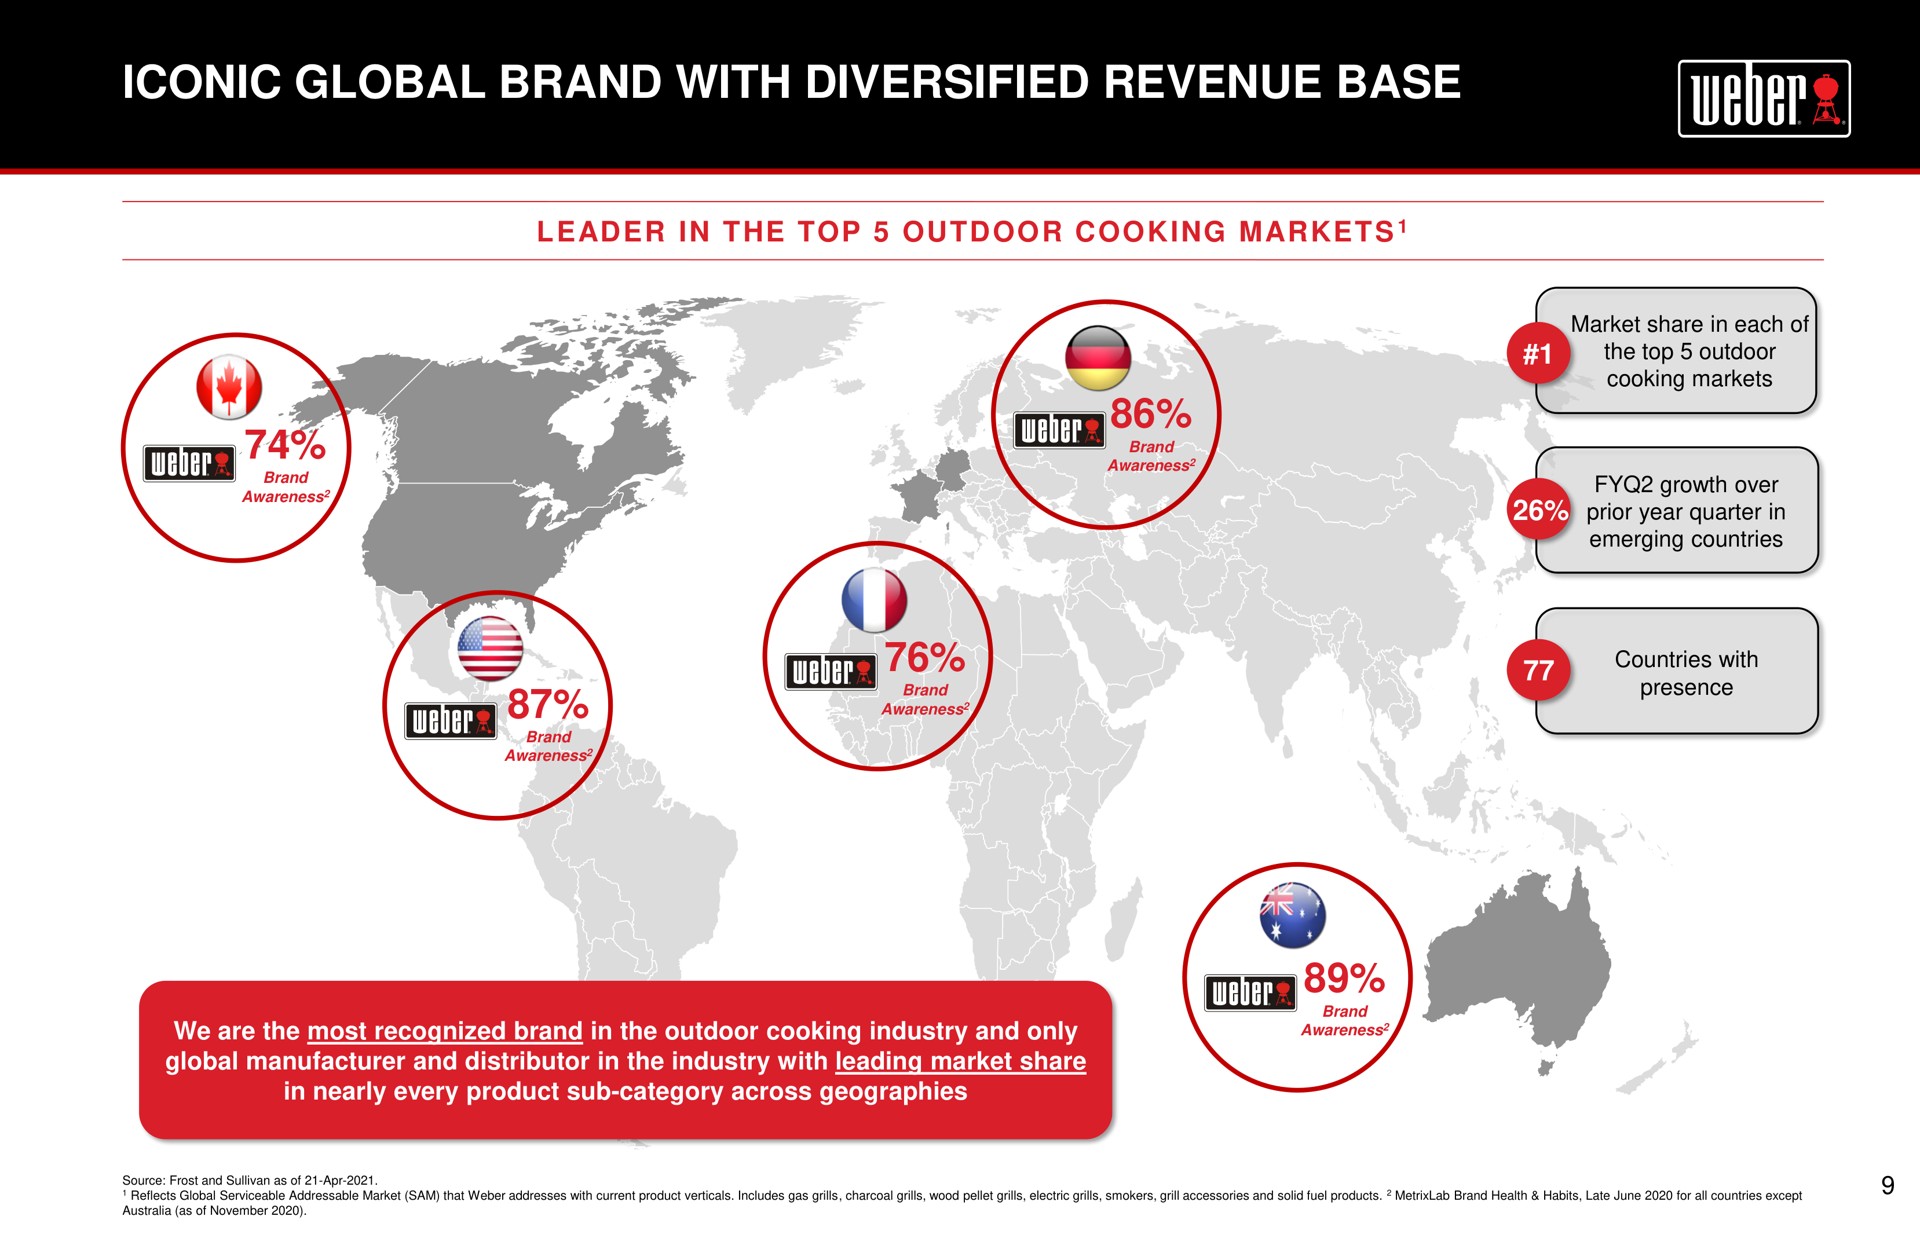 iconic global brand with diversified revenue base | Weber